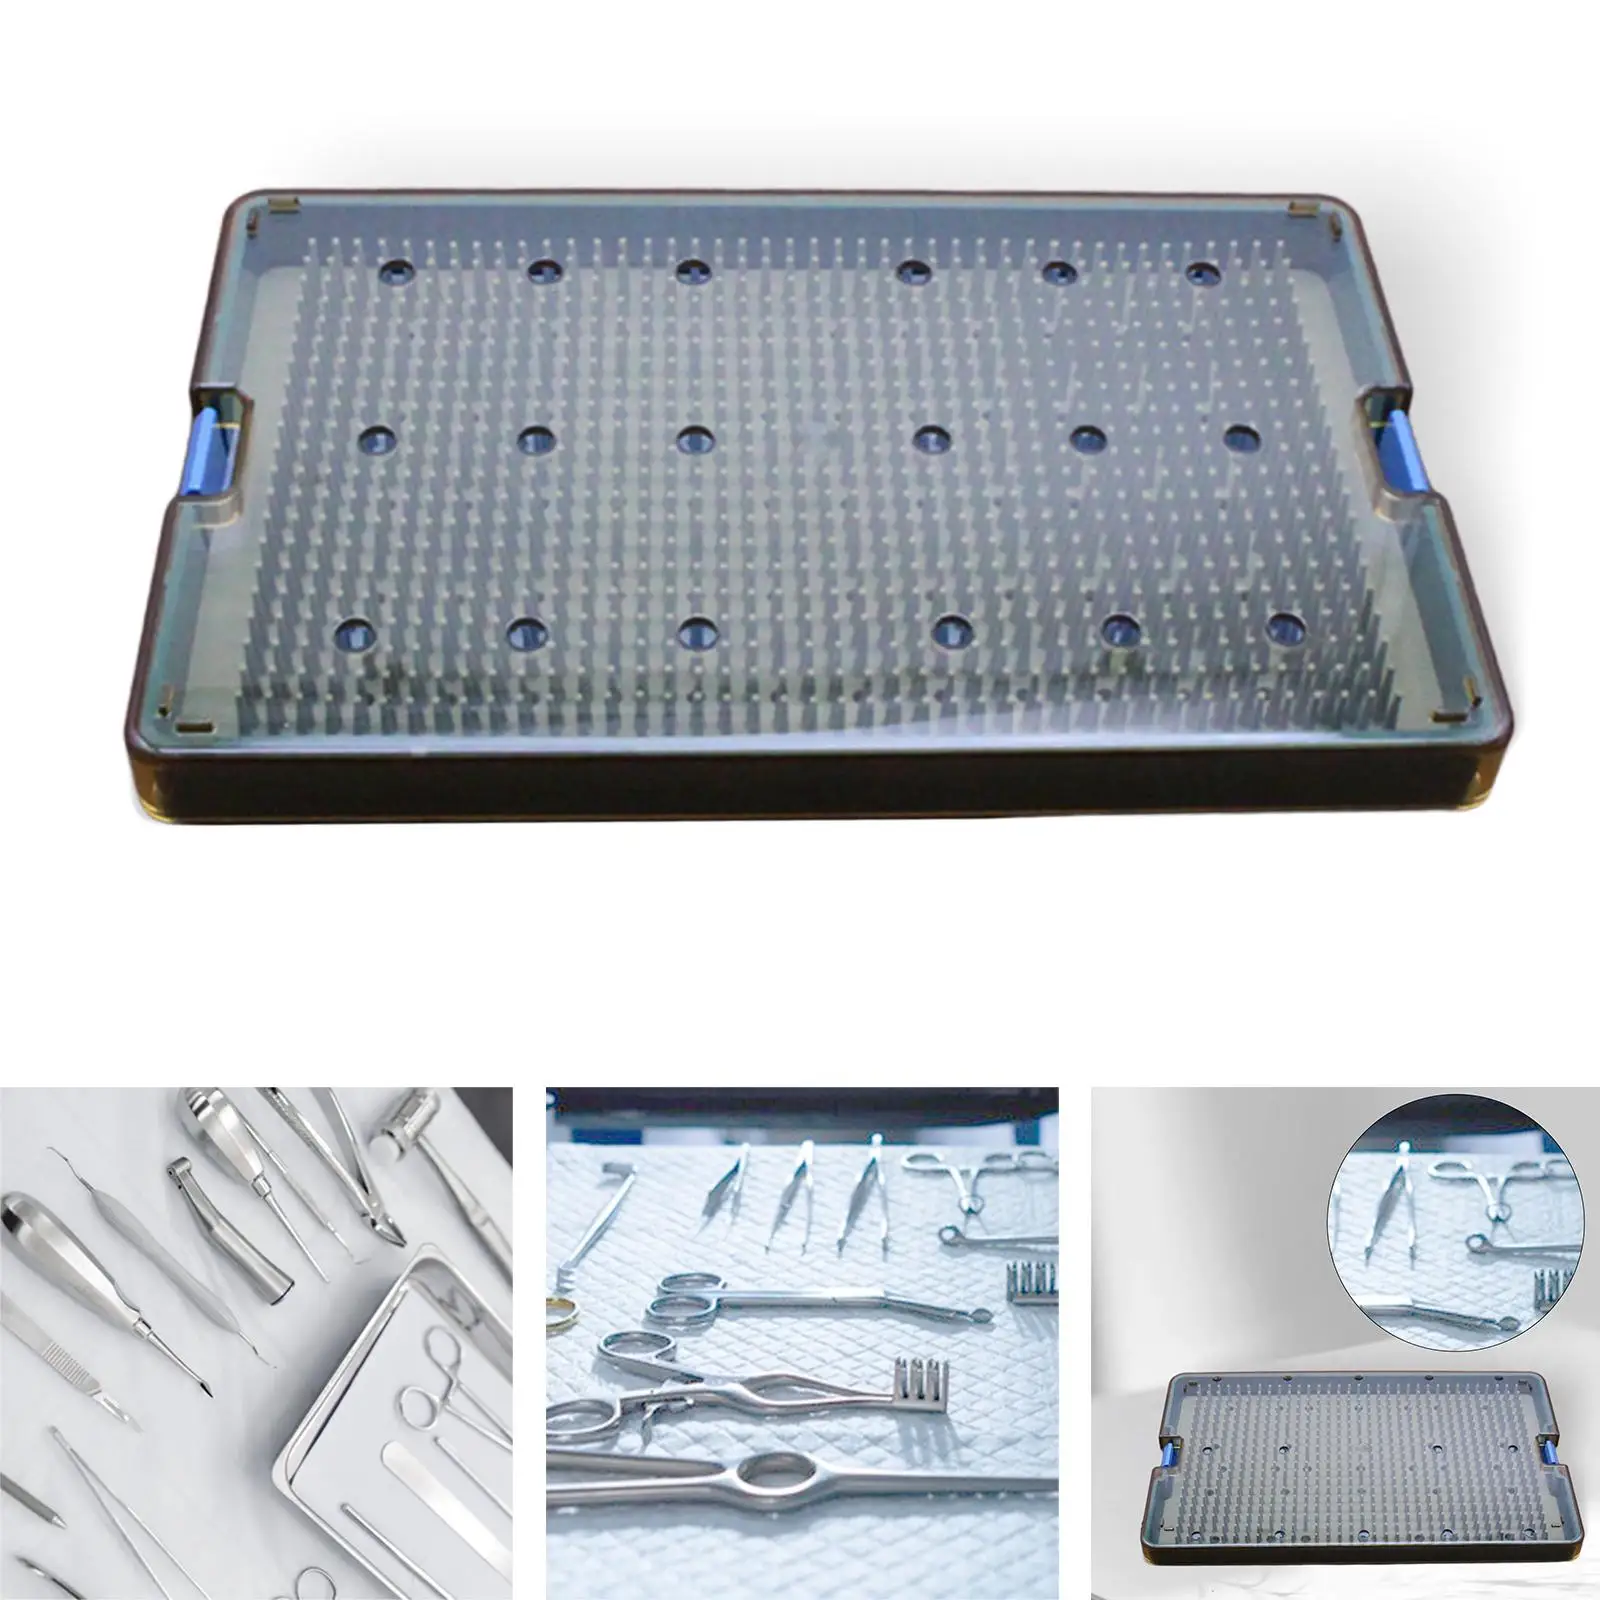 Sterilization Tray Rack Box Instruments Disinfection Box Autoclavable Box for Ophthalmic Surgery